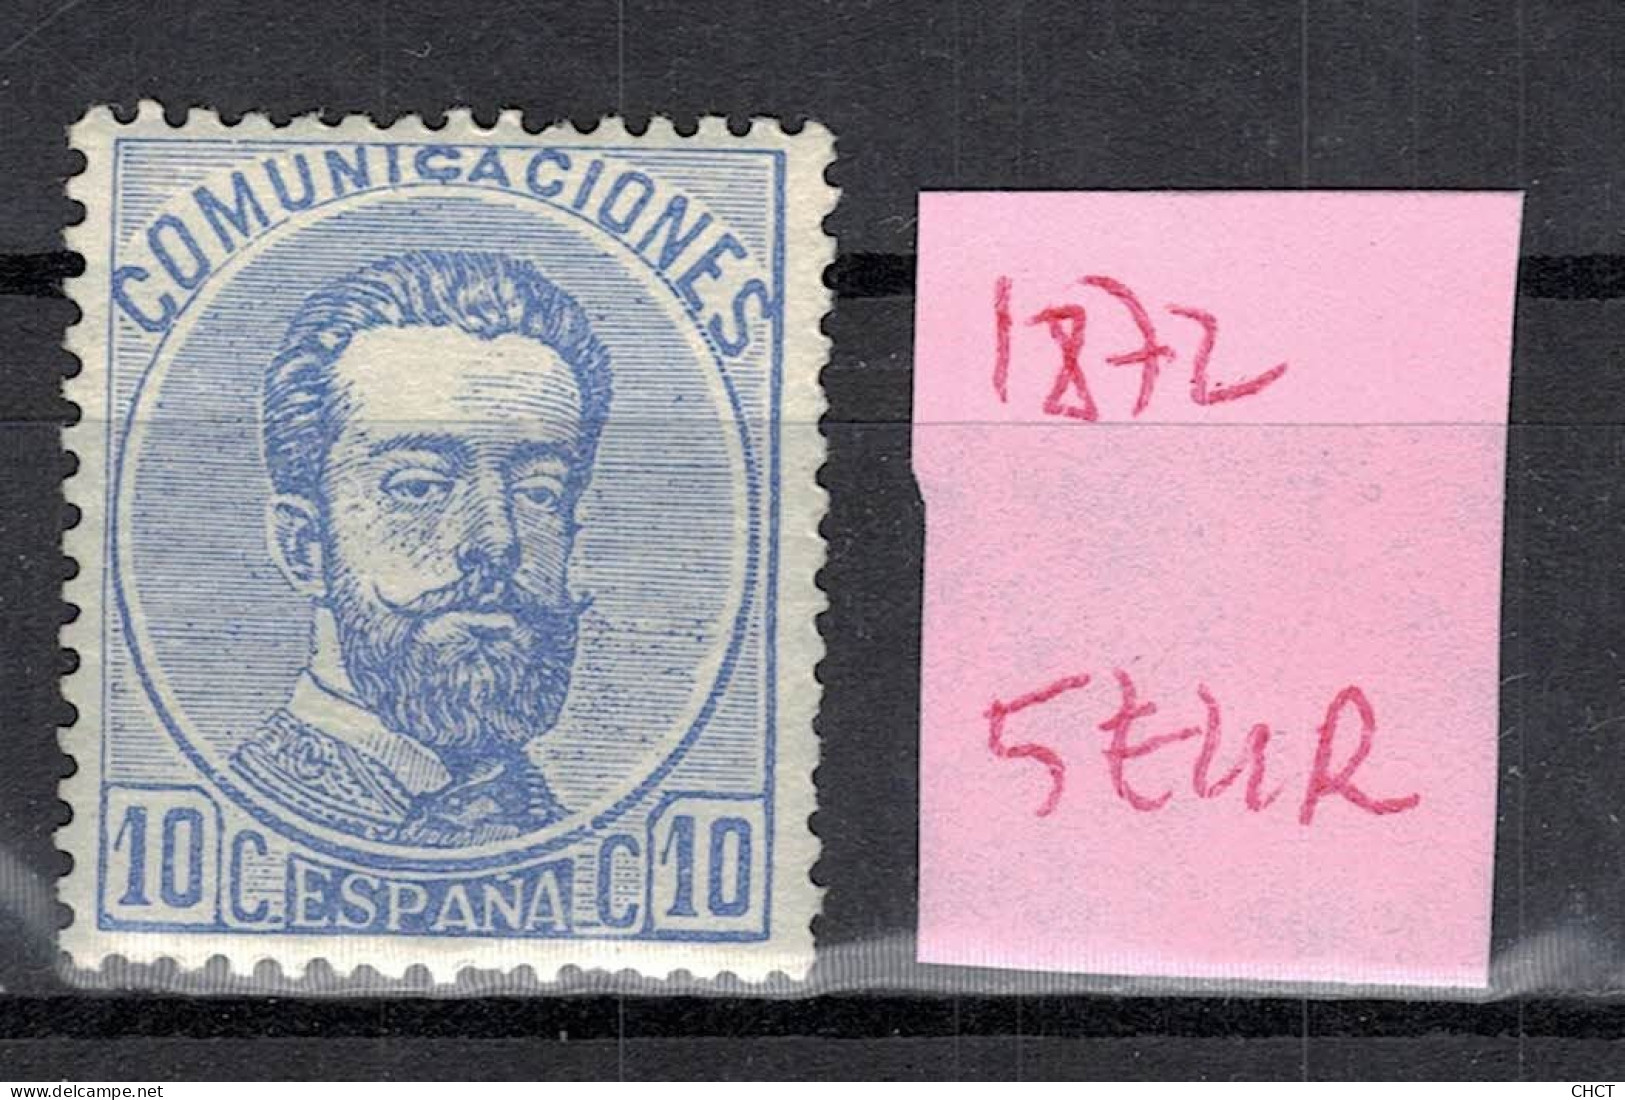 CHCT58 - Amadeo I, 1872, MH, Spain - Unused Stamps